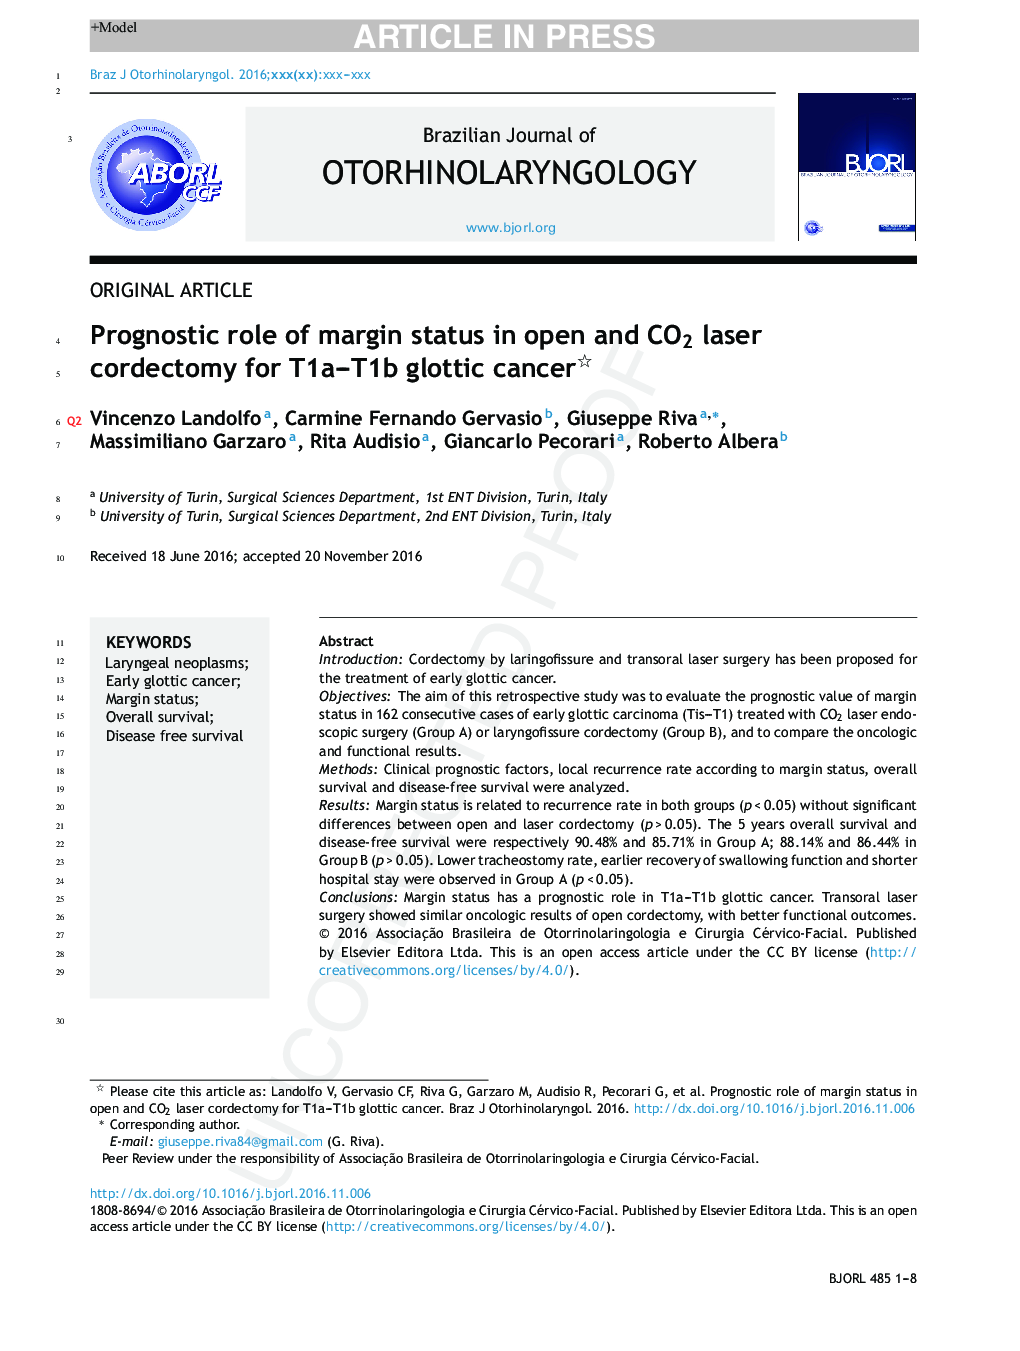 Prognostic role of margin status in open and CO2 laser cordectomy for T1a-T1b glottic cancer